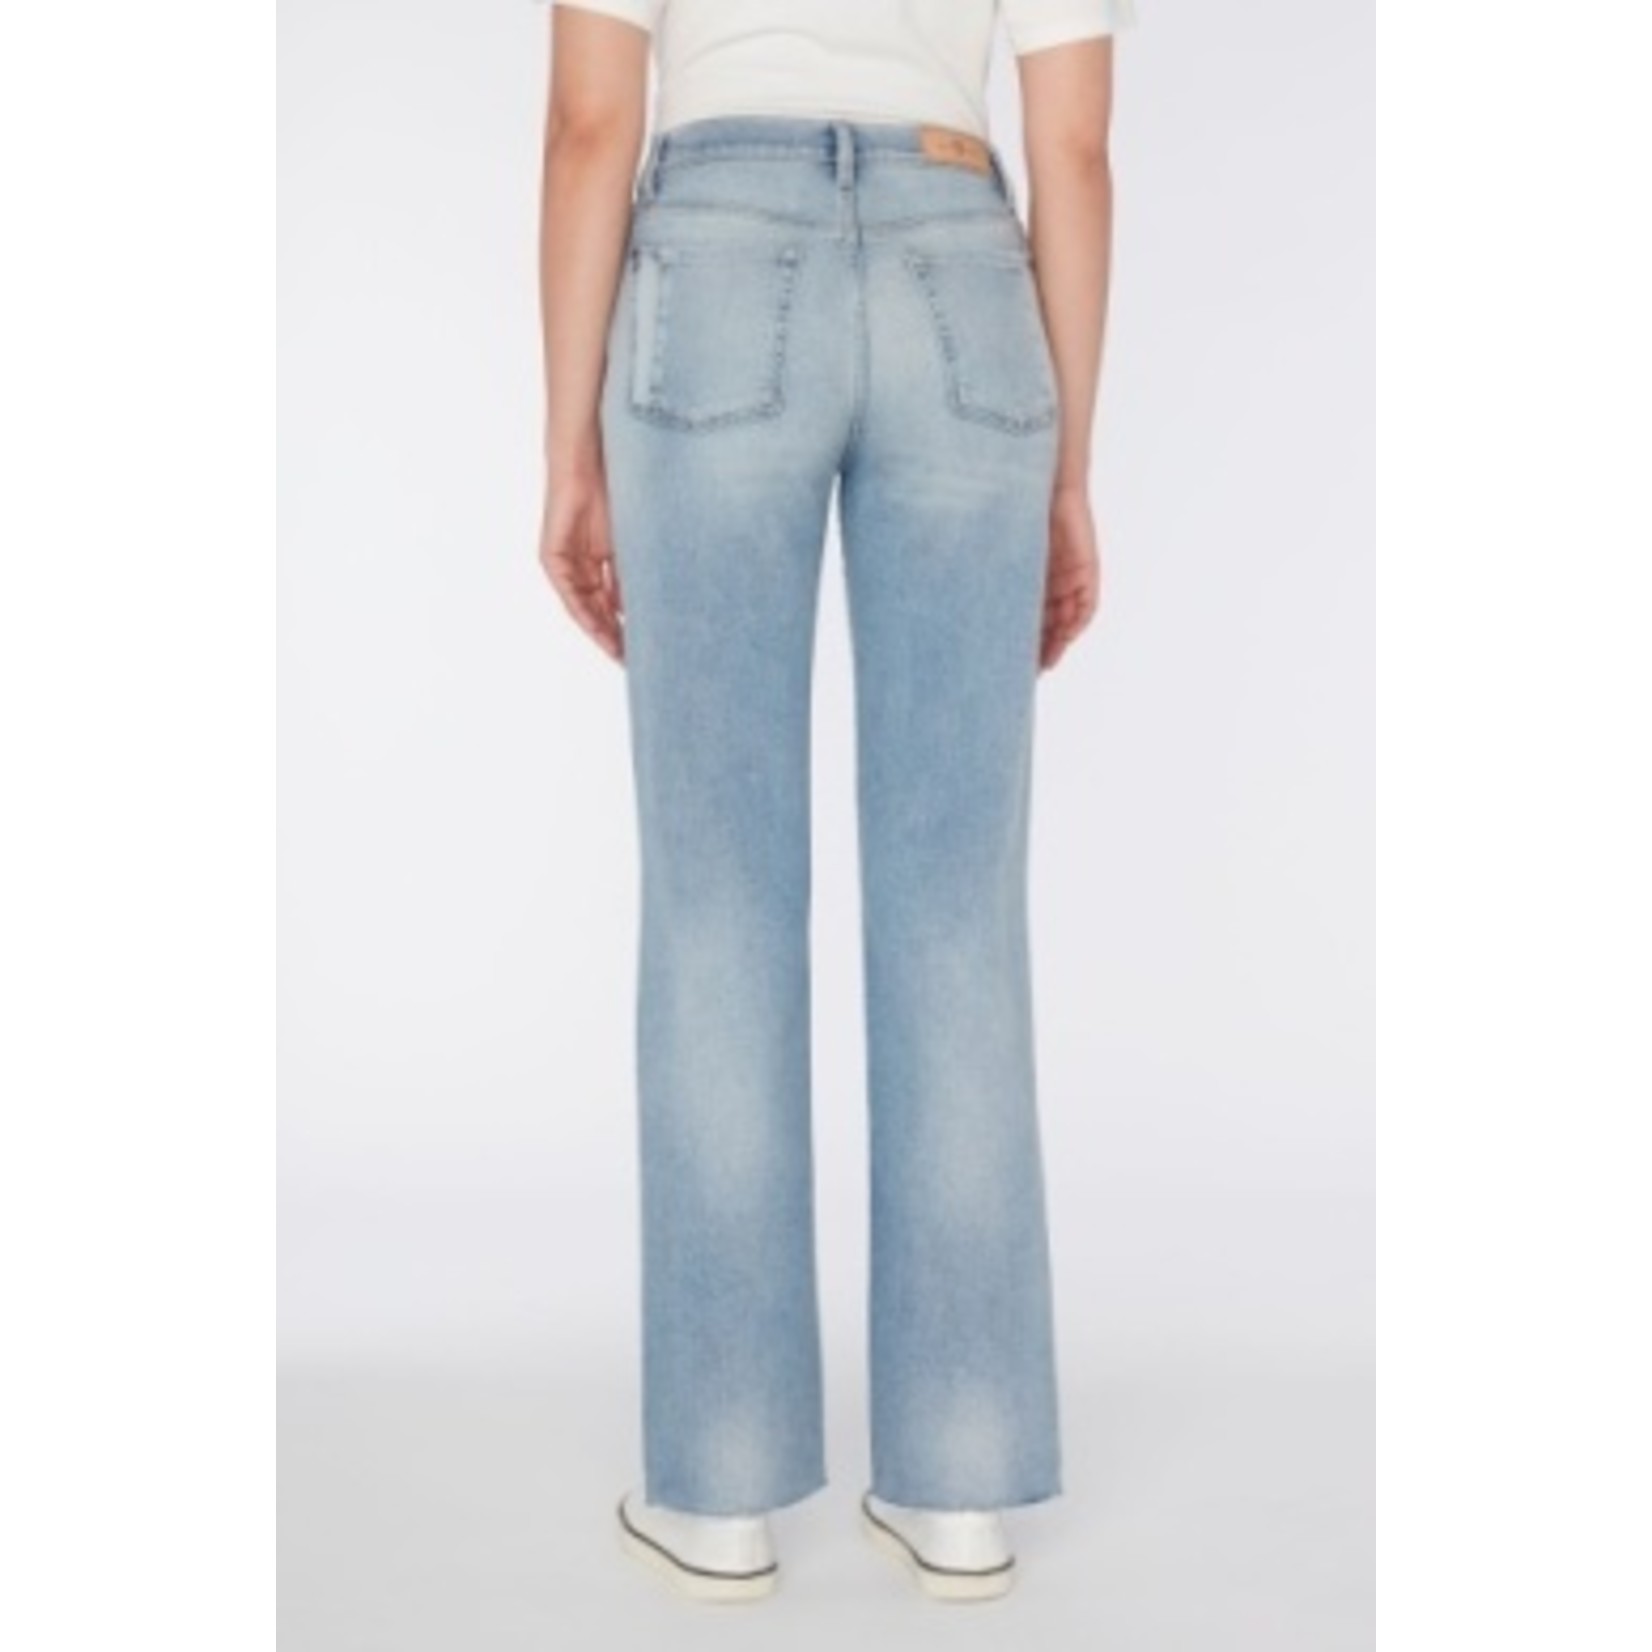 7 For All Mankind Ellie Straight Luxe vintage